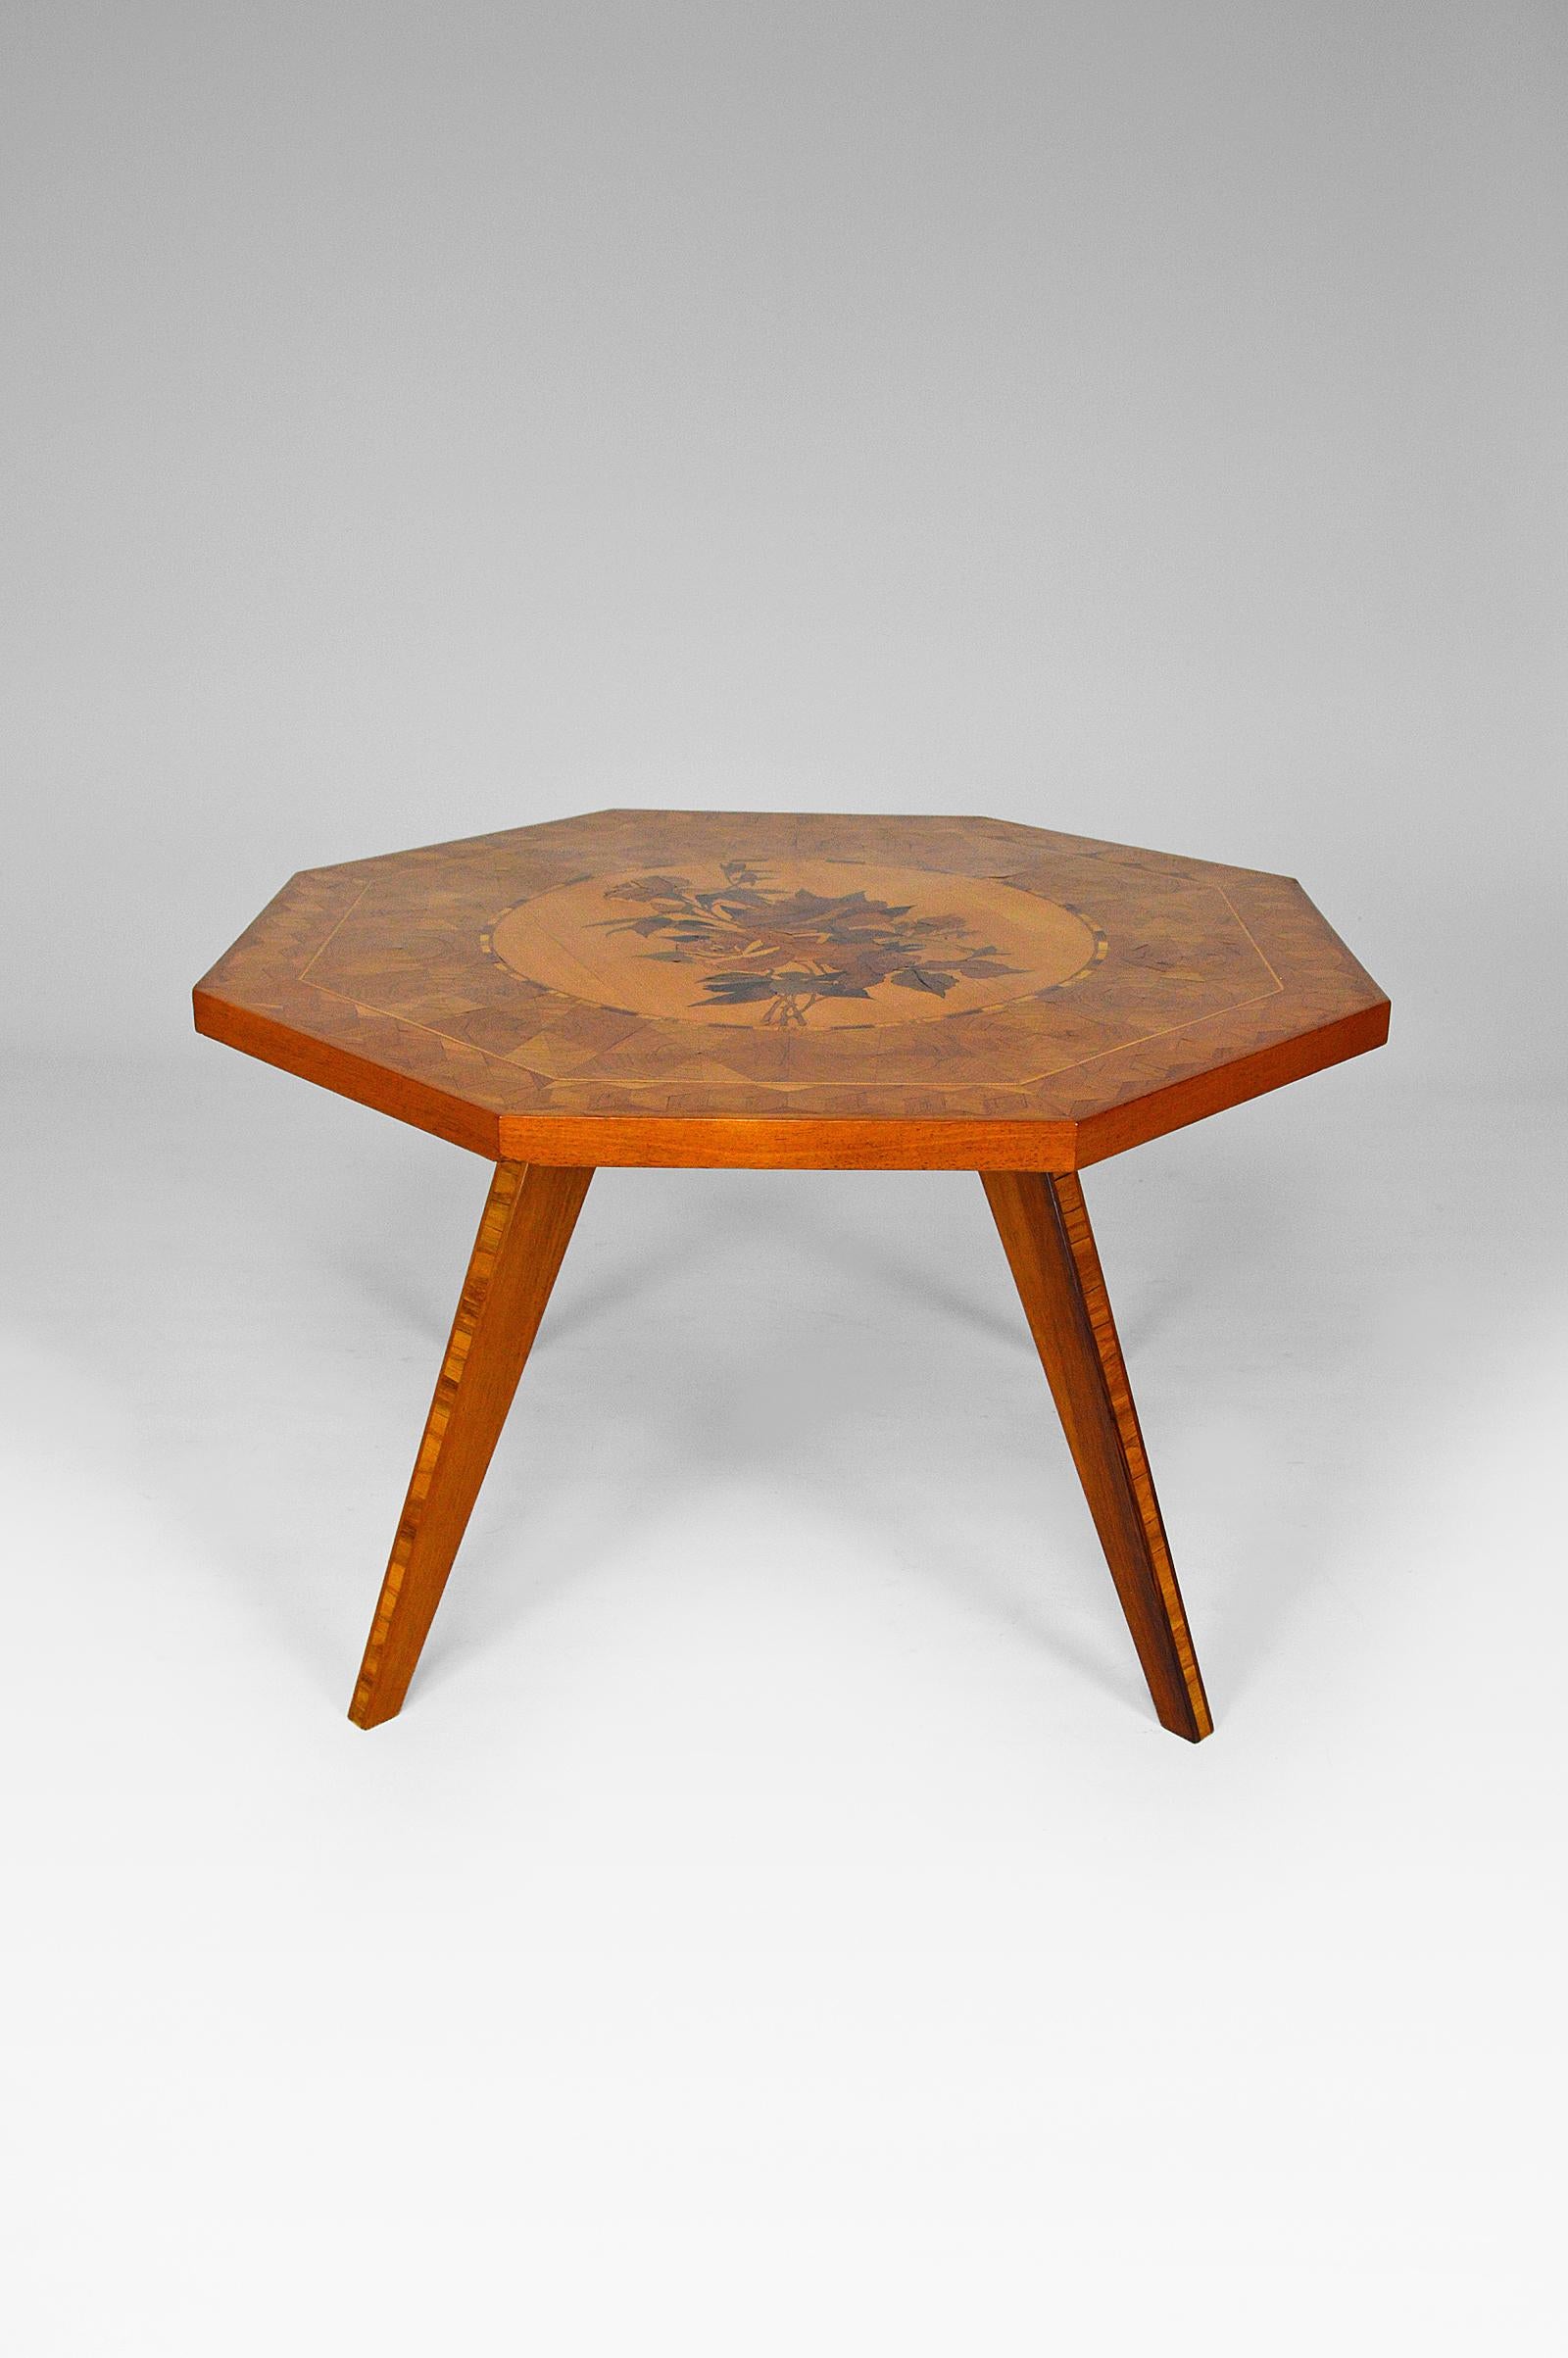 Mid-20th Century Octagonal Coffee Table with Floral Marquetry Top, Italy, circa 1950